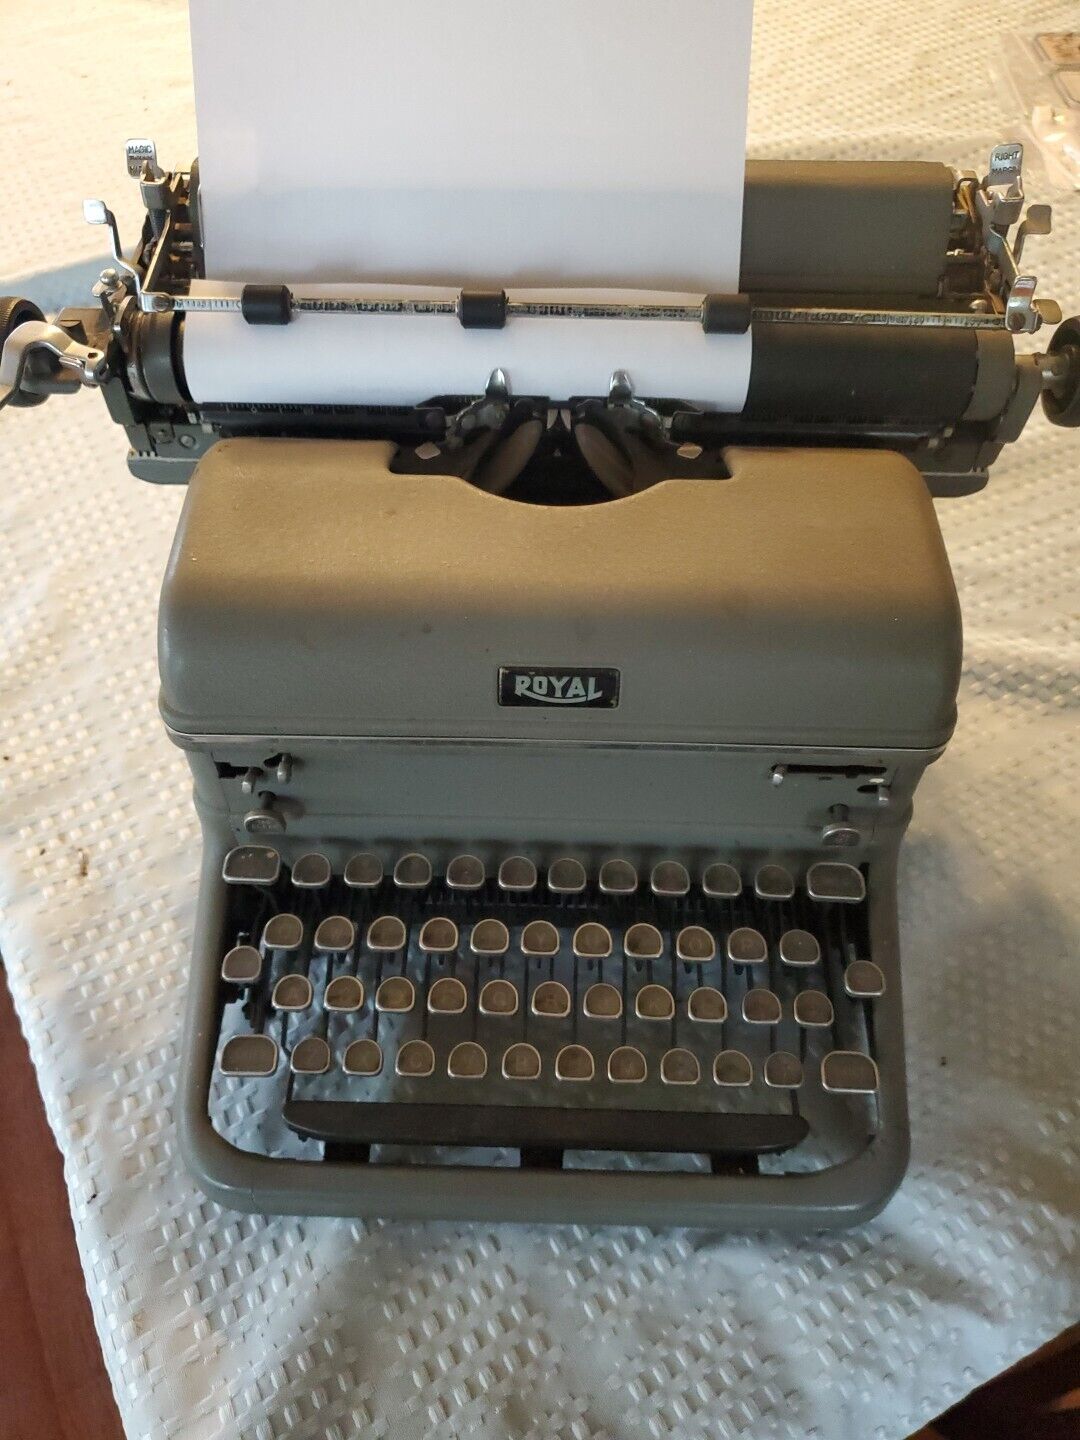 Vintage 1930’s-40’s Royal Quiet Deluxe Manual Typewriter in Case